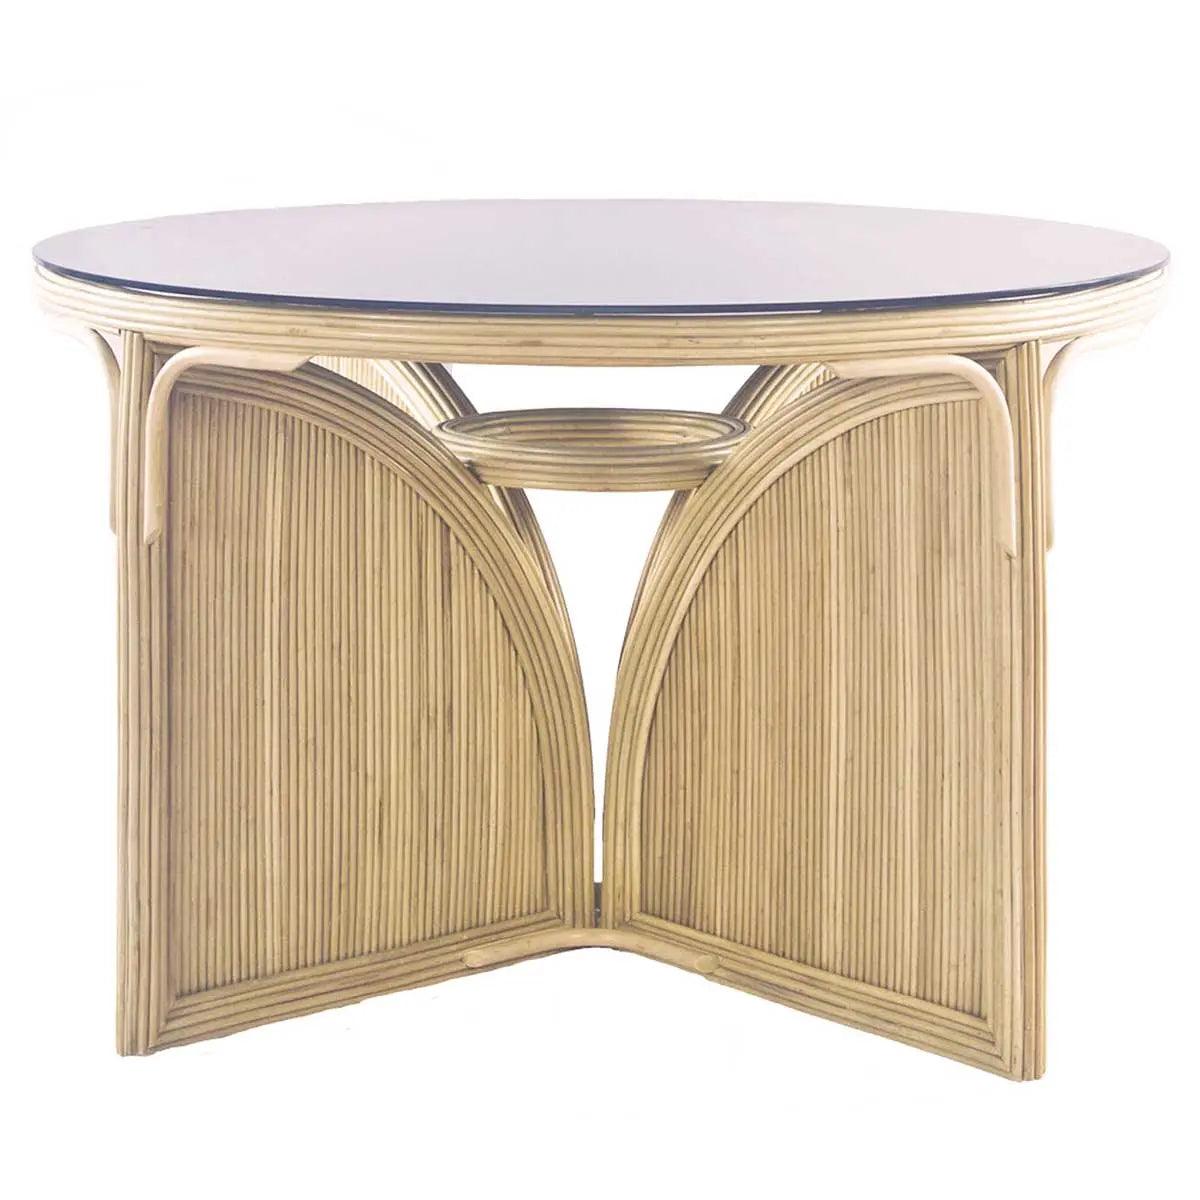 Catalina Dining Table with Smokey Glass Top The Family Love Tree